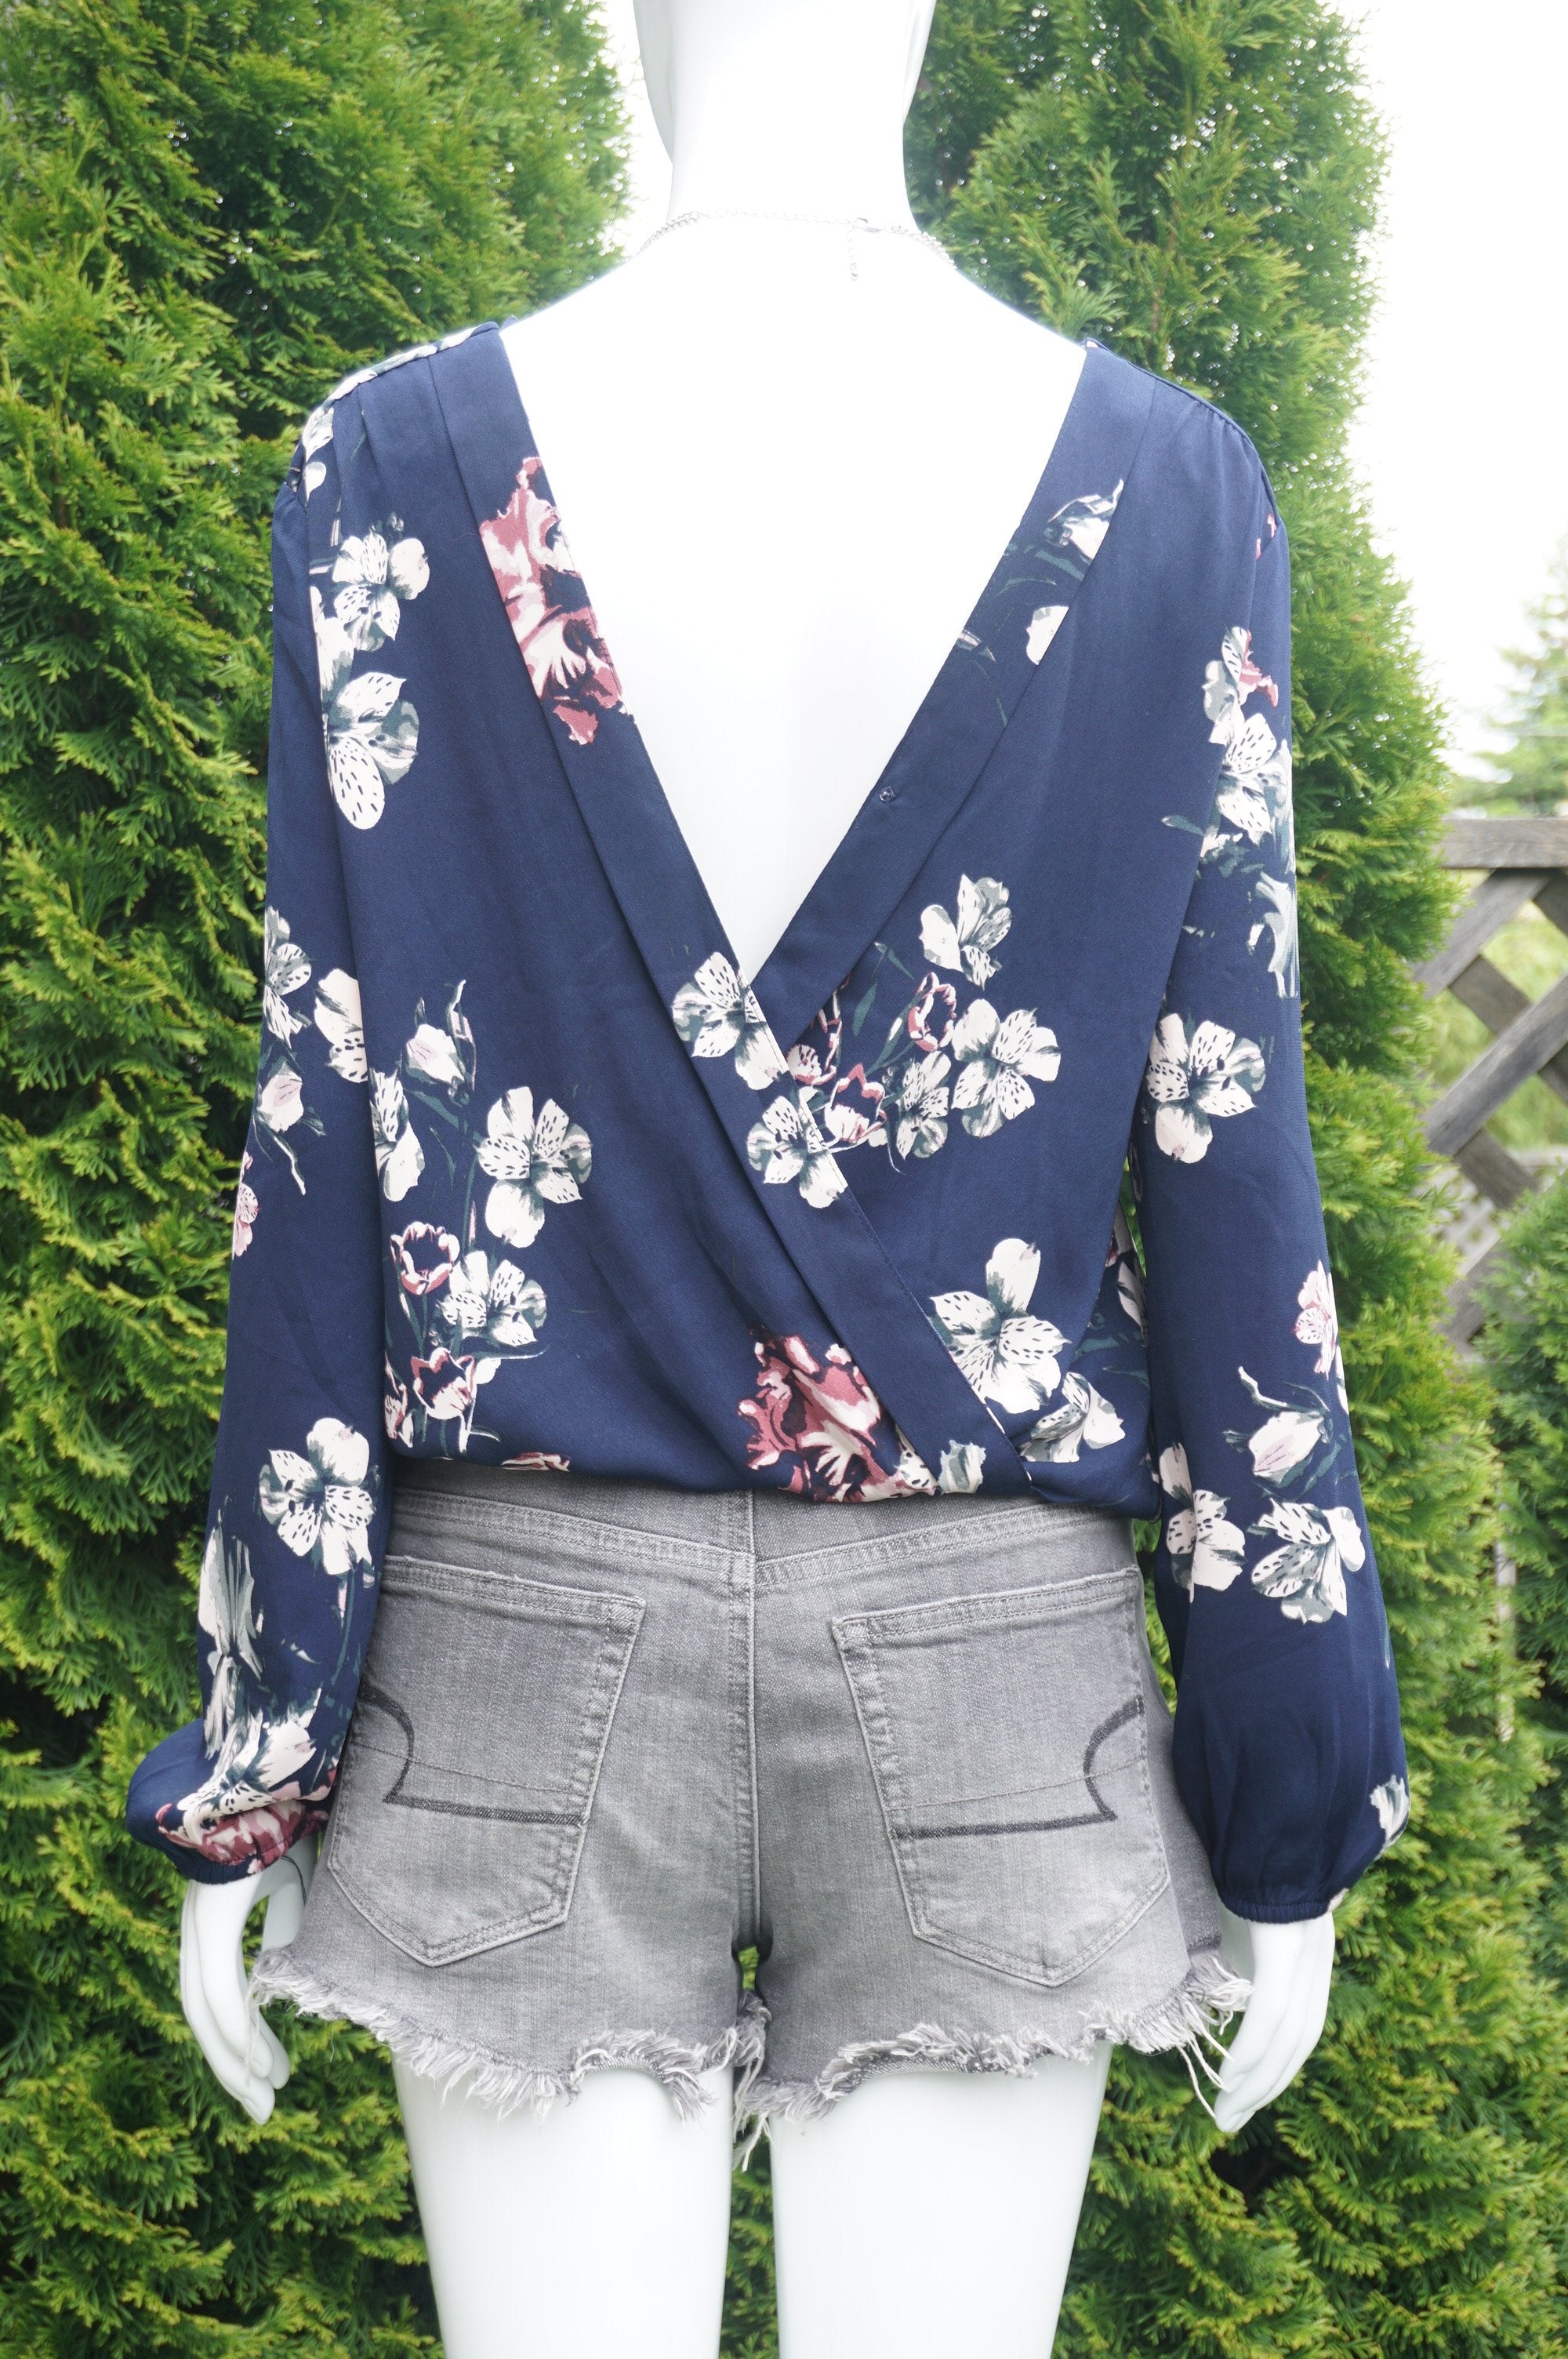 Dynamite Long Sleeve Blue Floral Wrap Back top, Cute floral prints plus a sexy wrap back look for your perfect summer outing., Blue, 100% Polyester, women's Tops, women's Blue Tops, Dynamite women's Tops, wrap back blouse, dark blue top, long sleeve top, long sleeve blouse, open back top, open back blouse